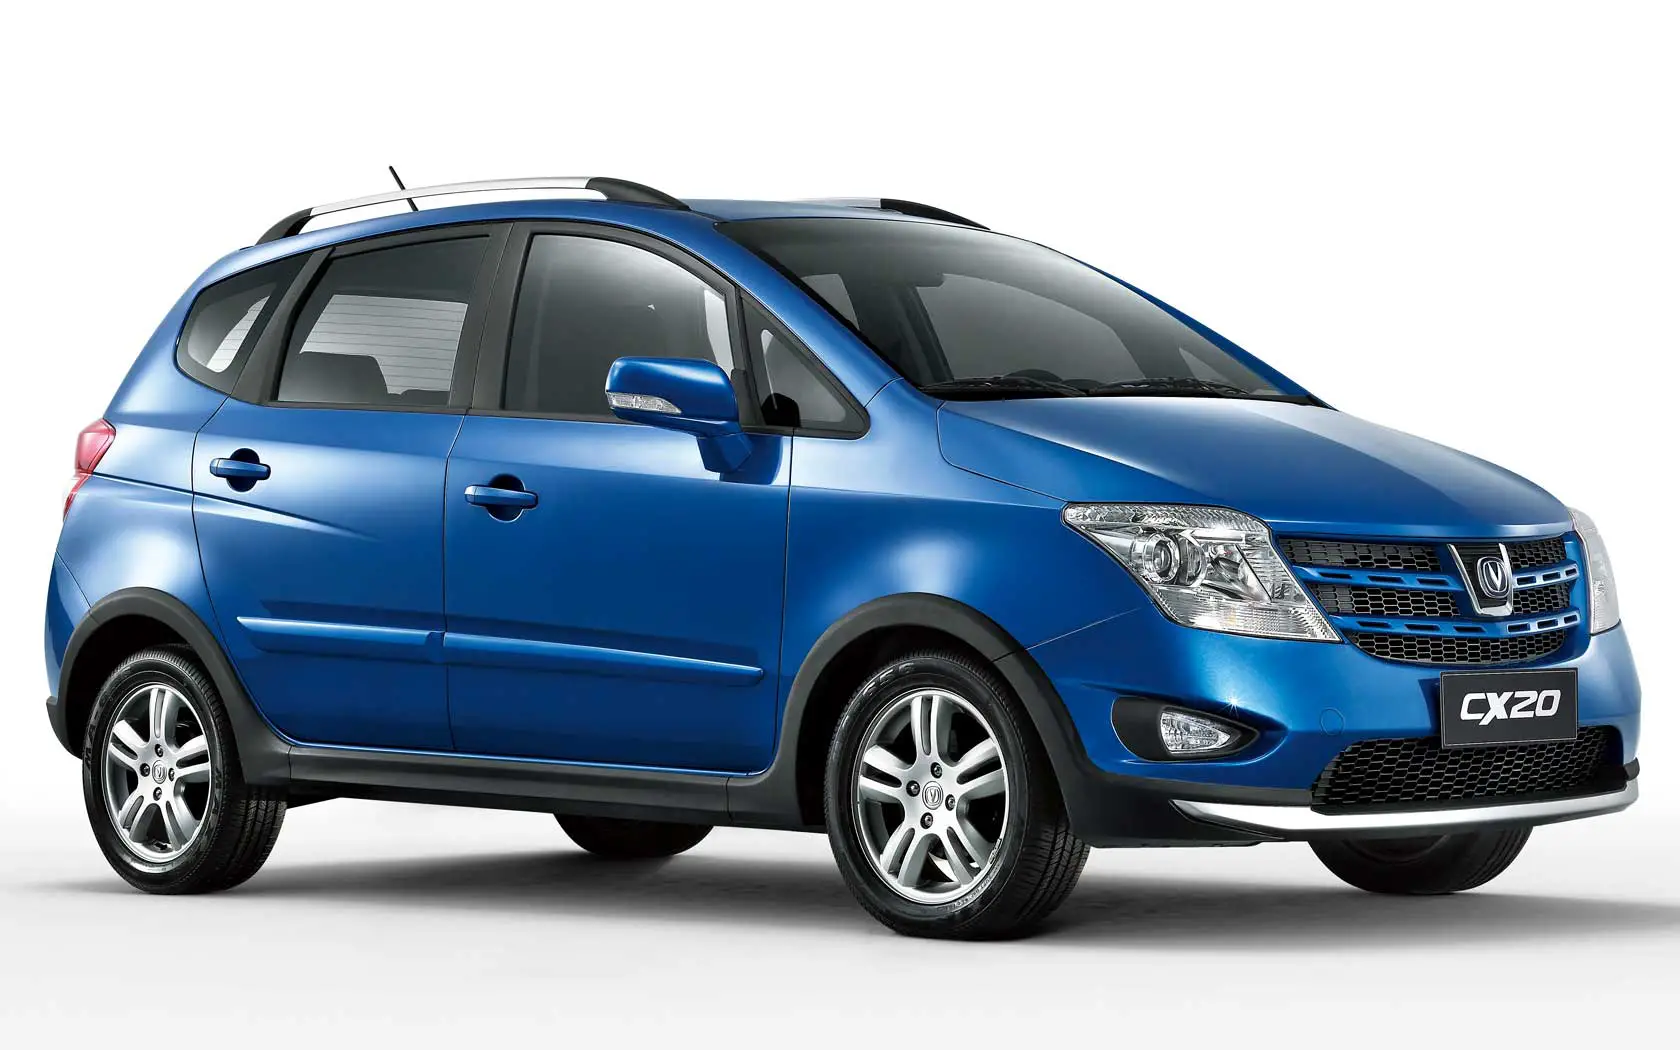 2014 Changan CX20 1.4L AMT Sunroof Exterior front cross view